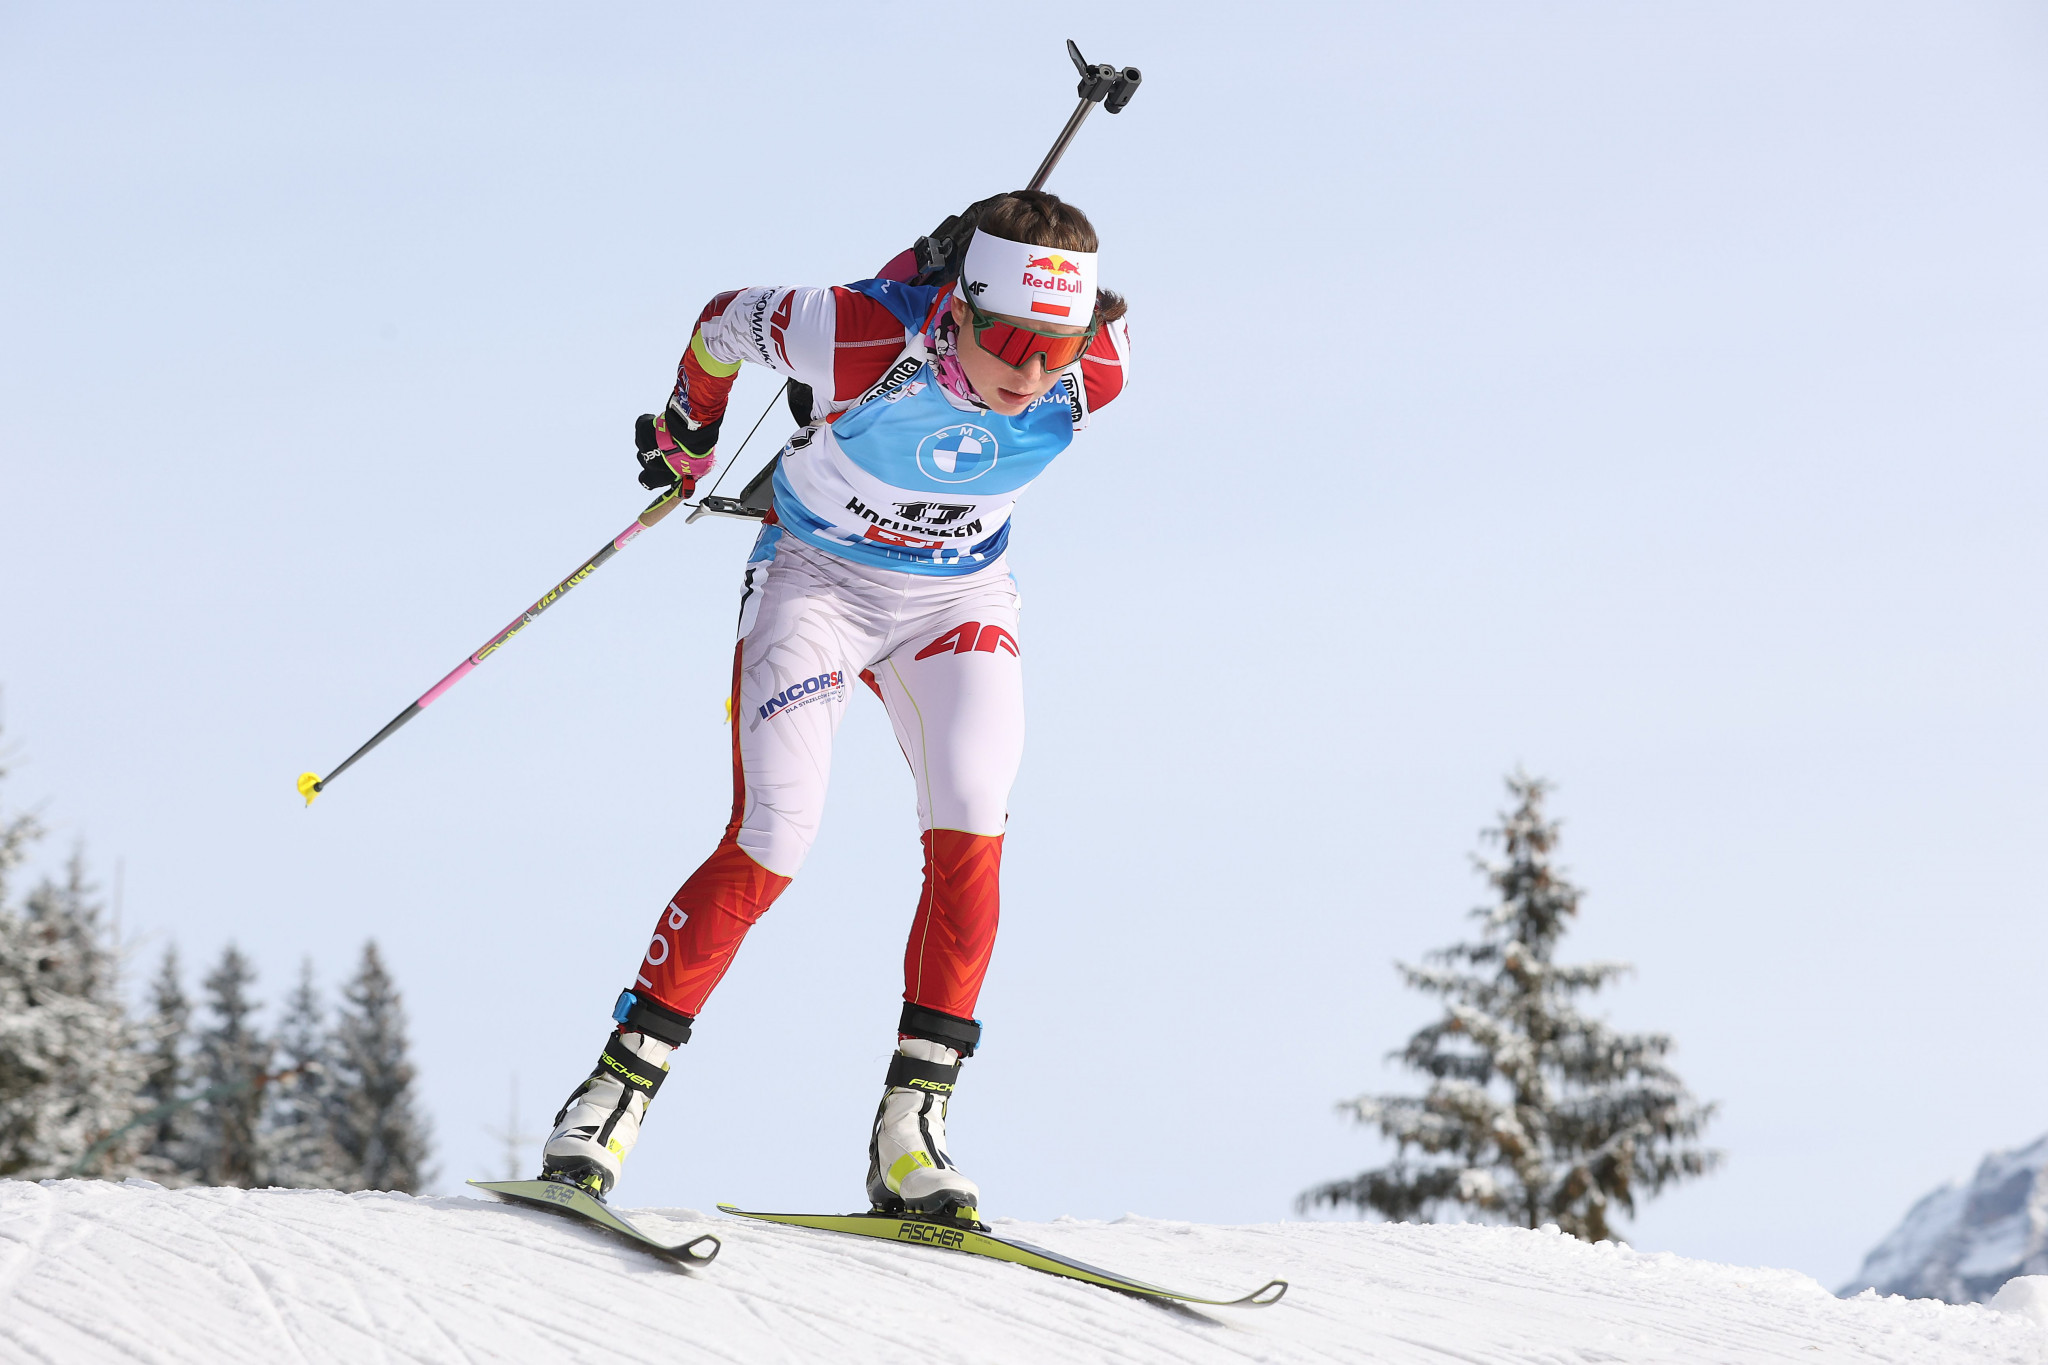 Zuk earns home pursuit victory at IBU Open European Championships